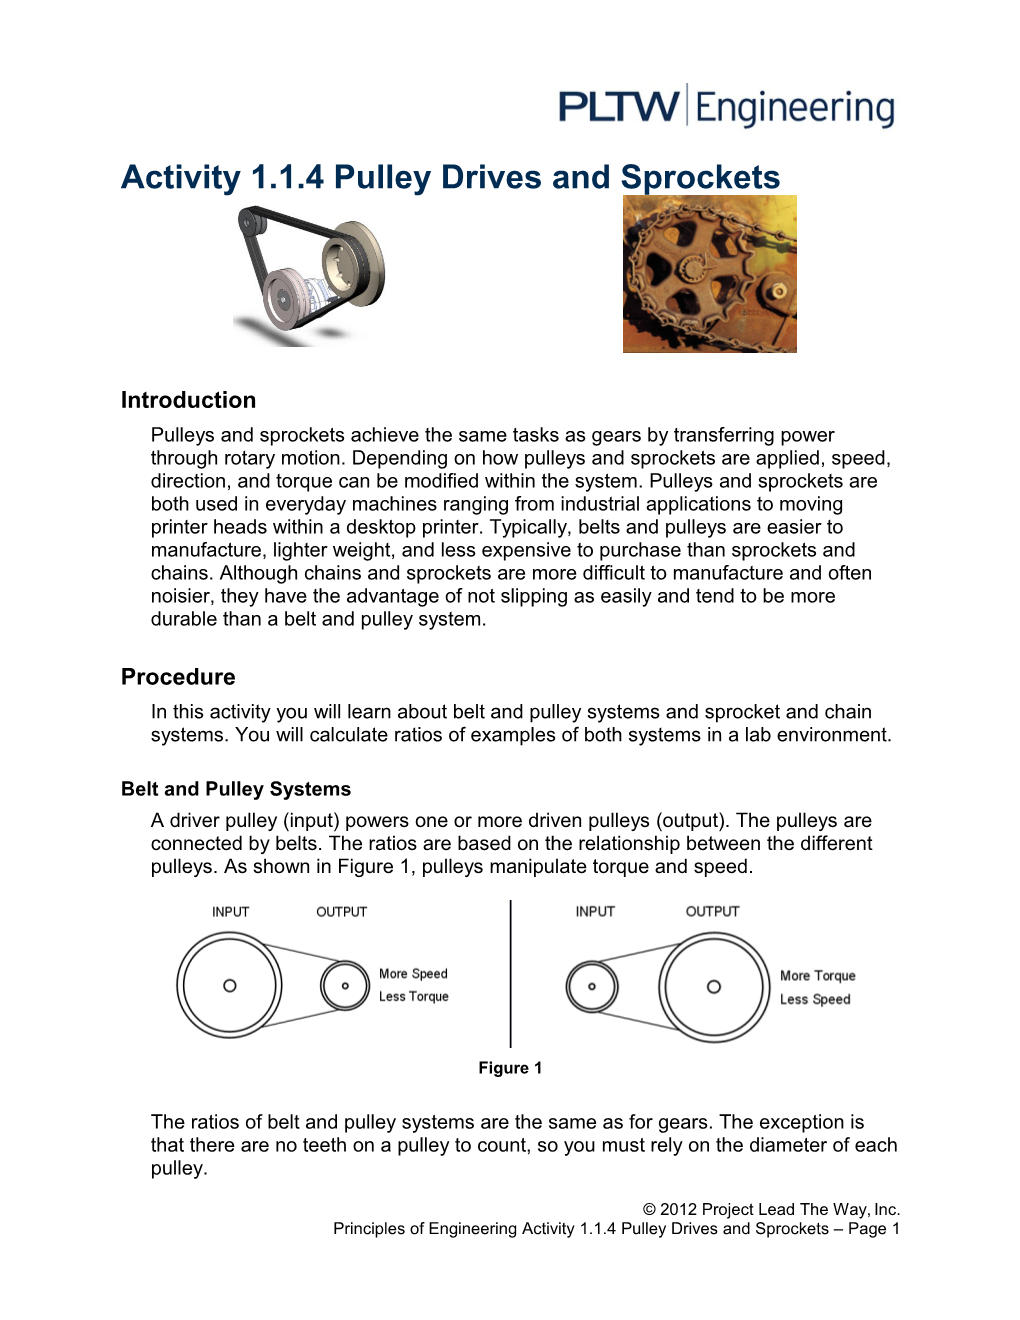 Activity 1.1.4 Pulley Drives And Sprockets